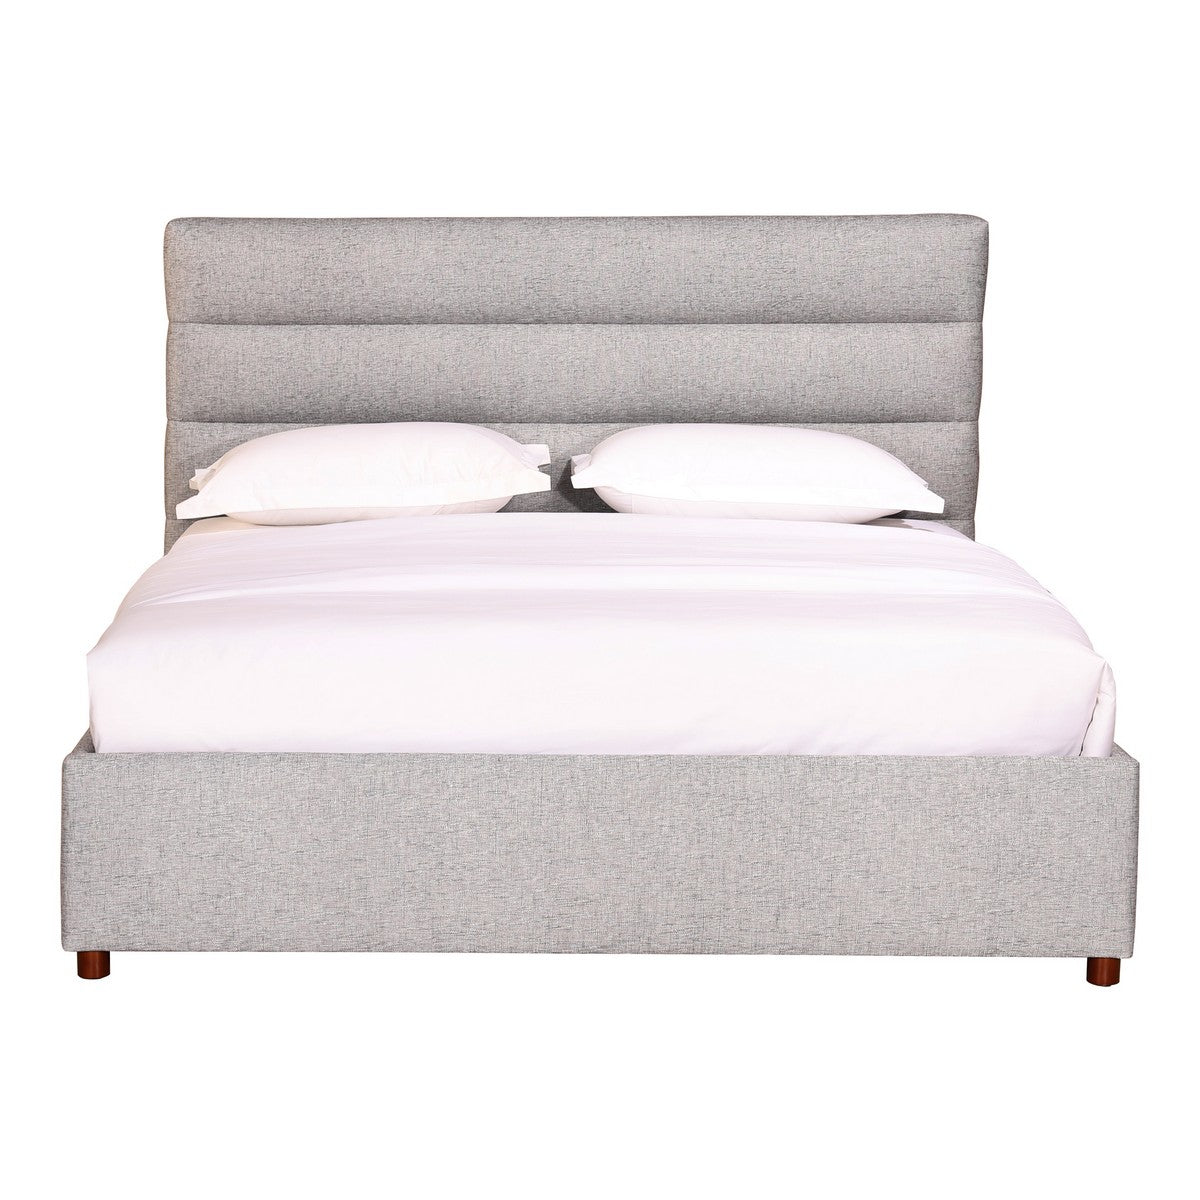 Moe's Home Collection Takio Queen Bed Light Grey - RN-1139-29